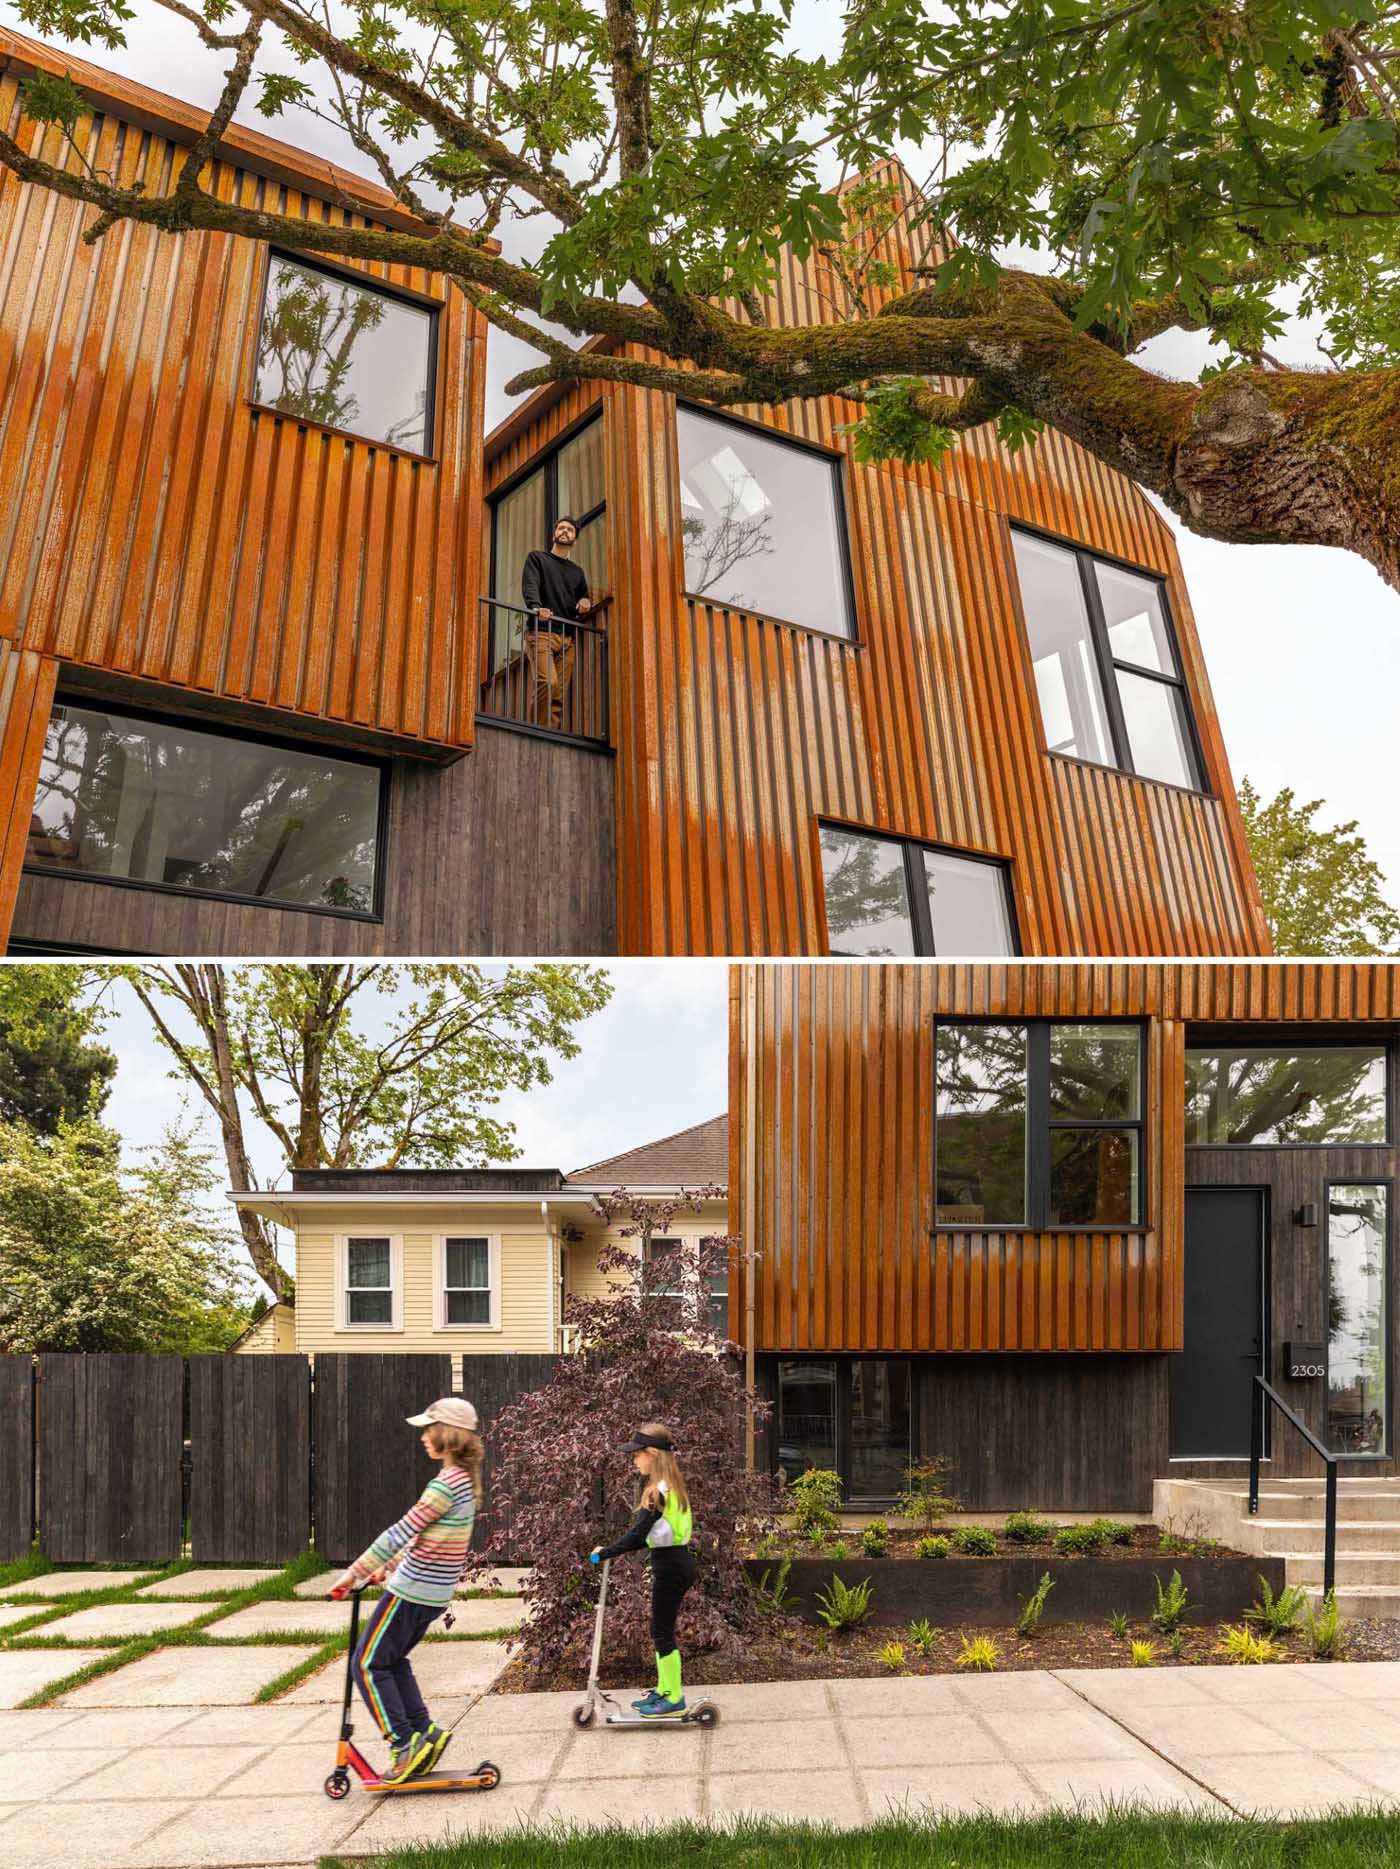 A modern townhouse on a corner, has an exterior clad in rusted corten steel.